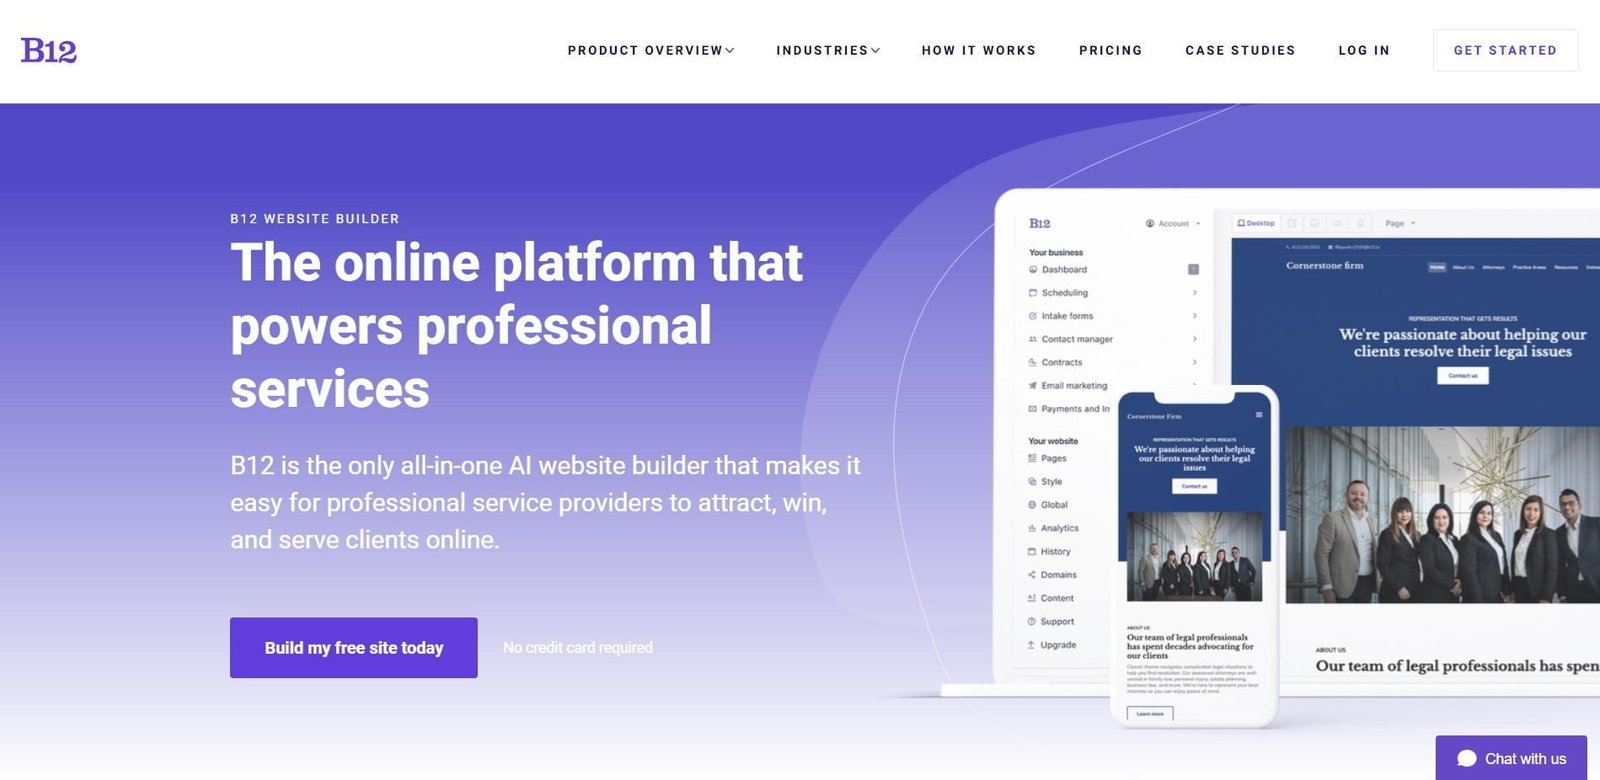 B12 is an AI Website Builder designed to help professional service providers attract